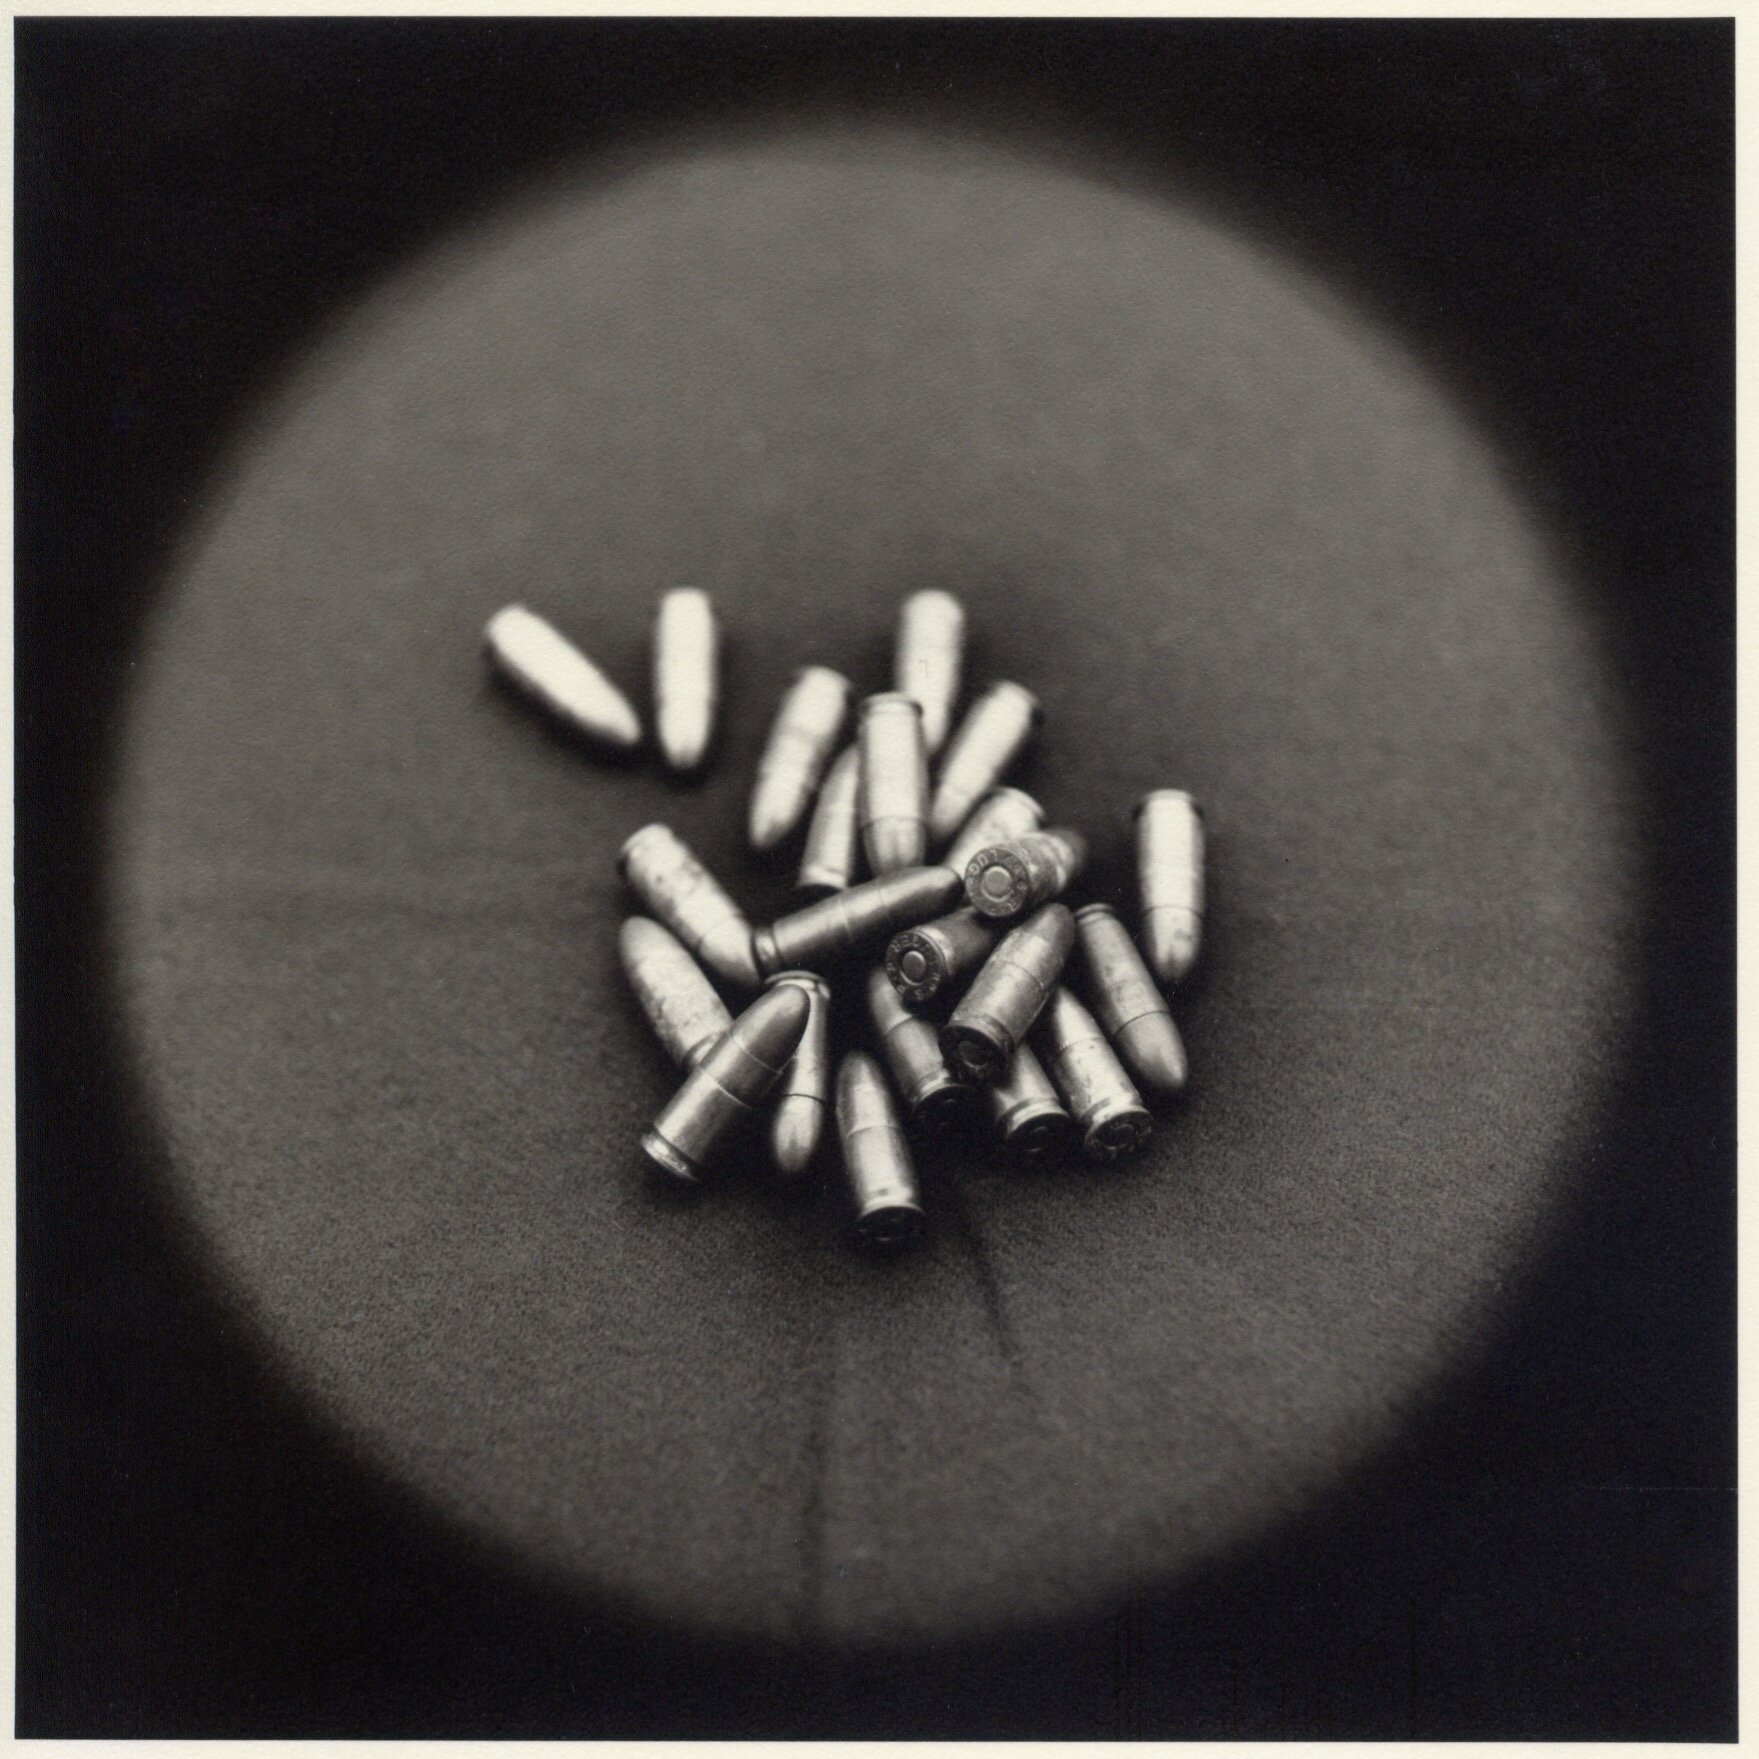   Bullets, confiscated ammunition   Toned gelatin silver print.   16 x 16 in. (40 x 40 cm.) 